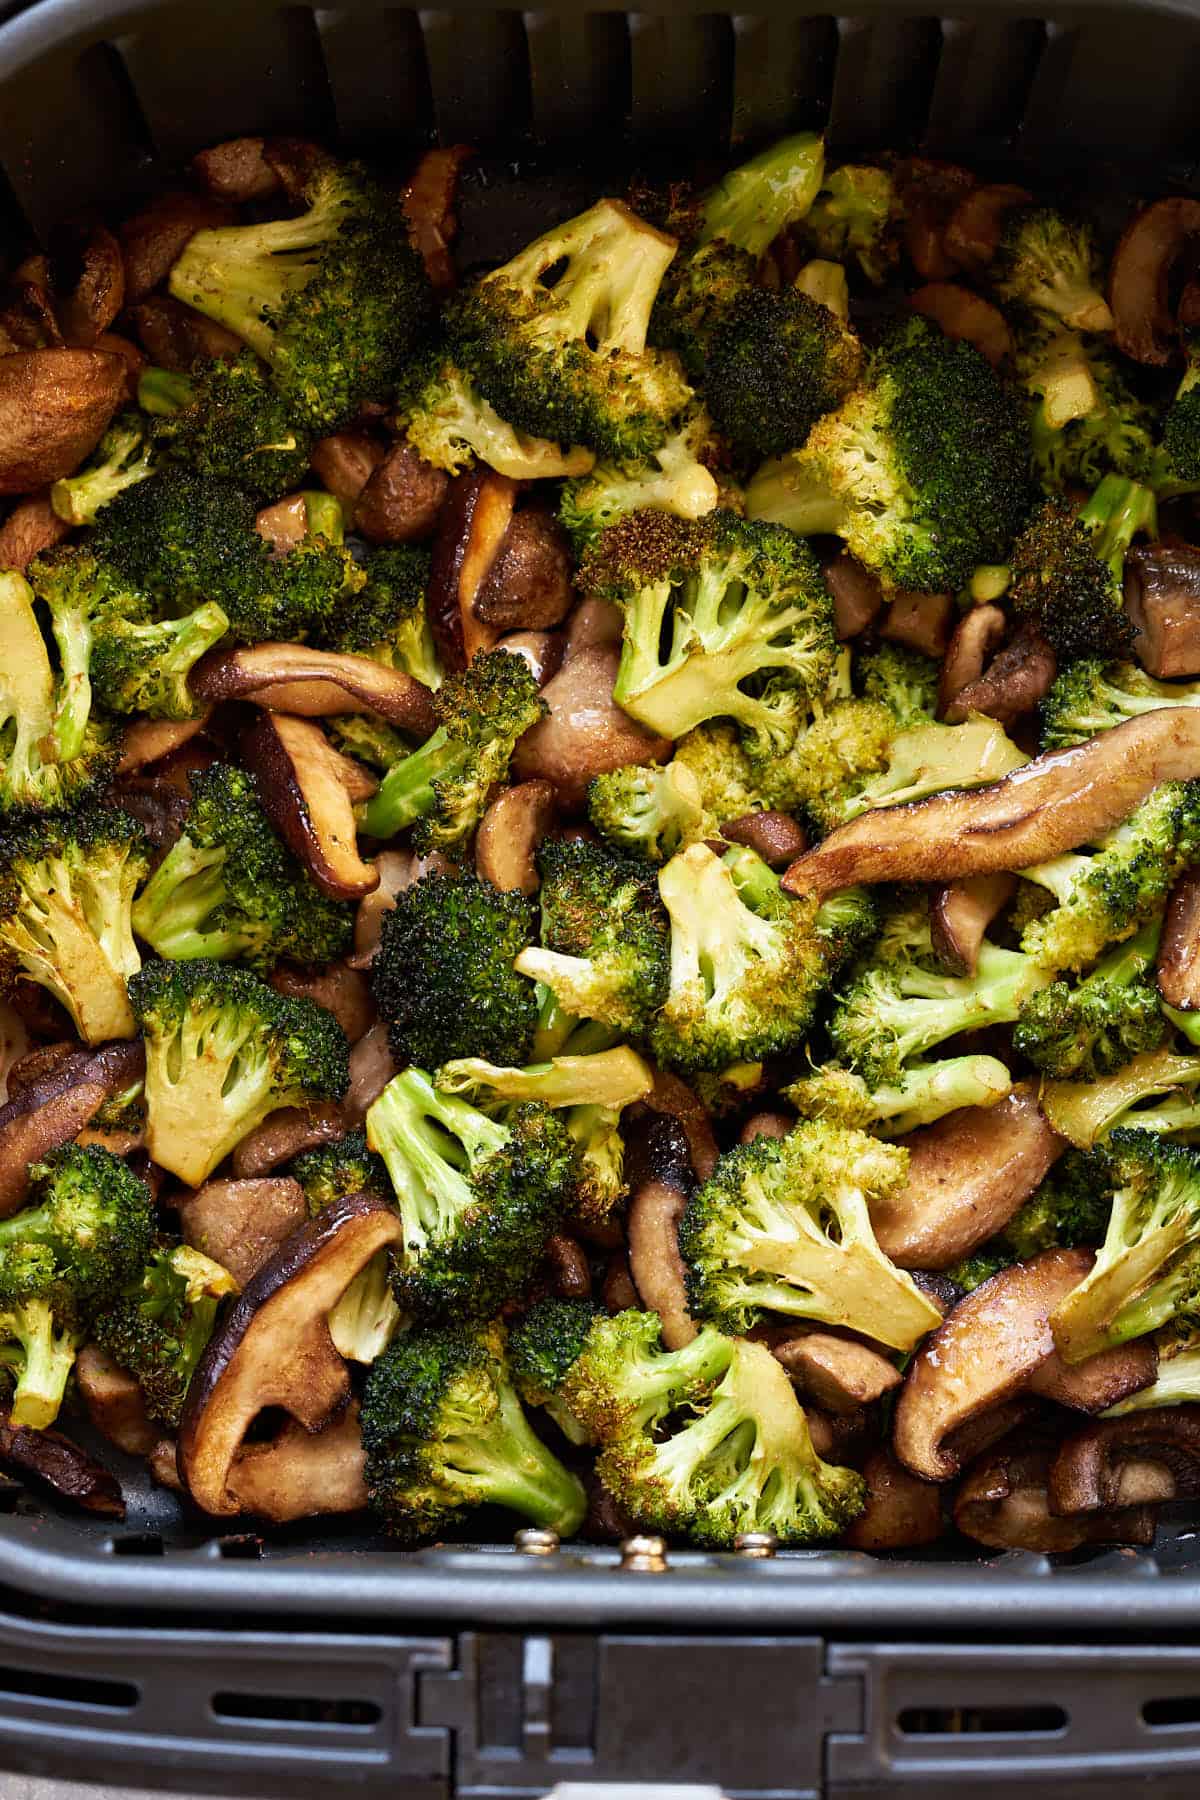 Air fryer broccoli and mushrooms in the air fryer basket.